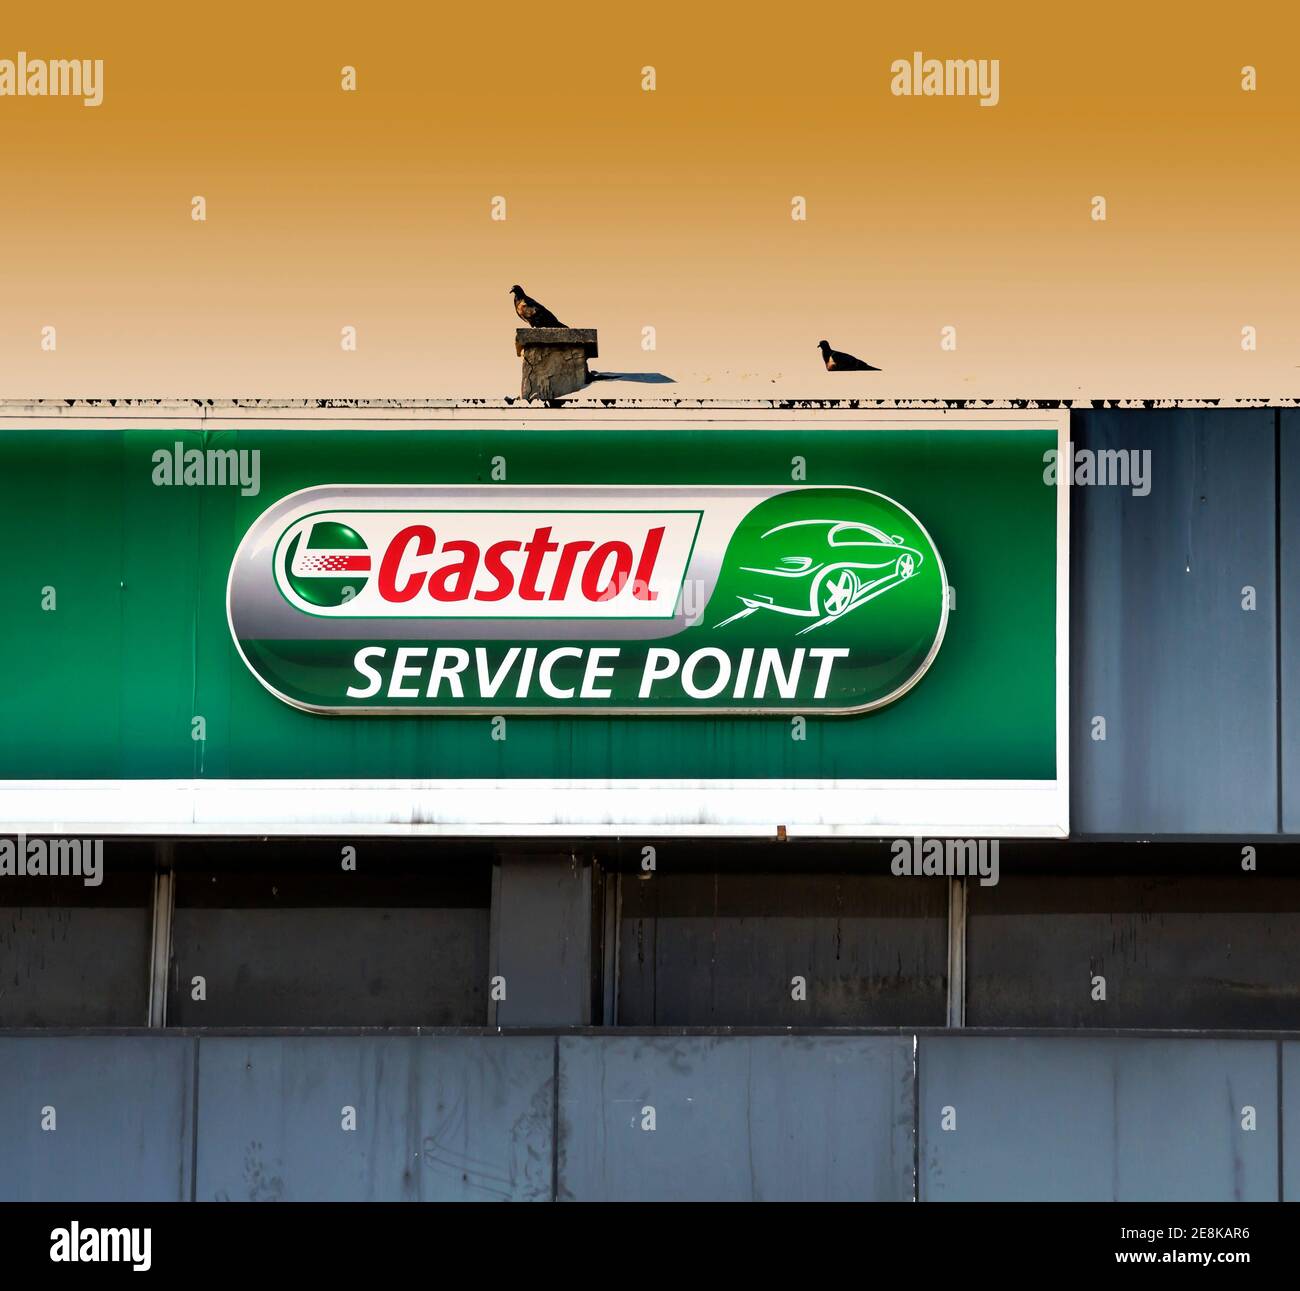 Castrol service point. Castrol is a British global brand of industrial and automotive lubricants offering a wide range of oils and greases Stock Photo